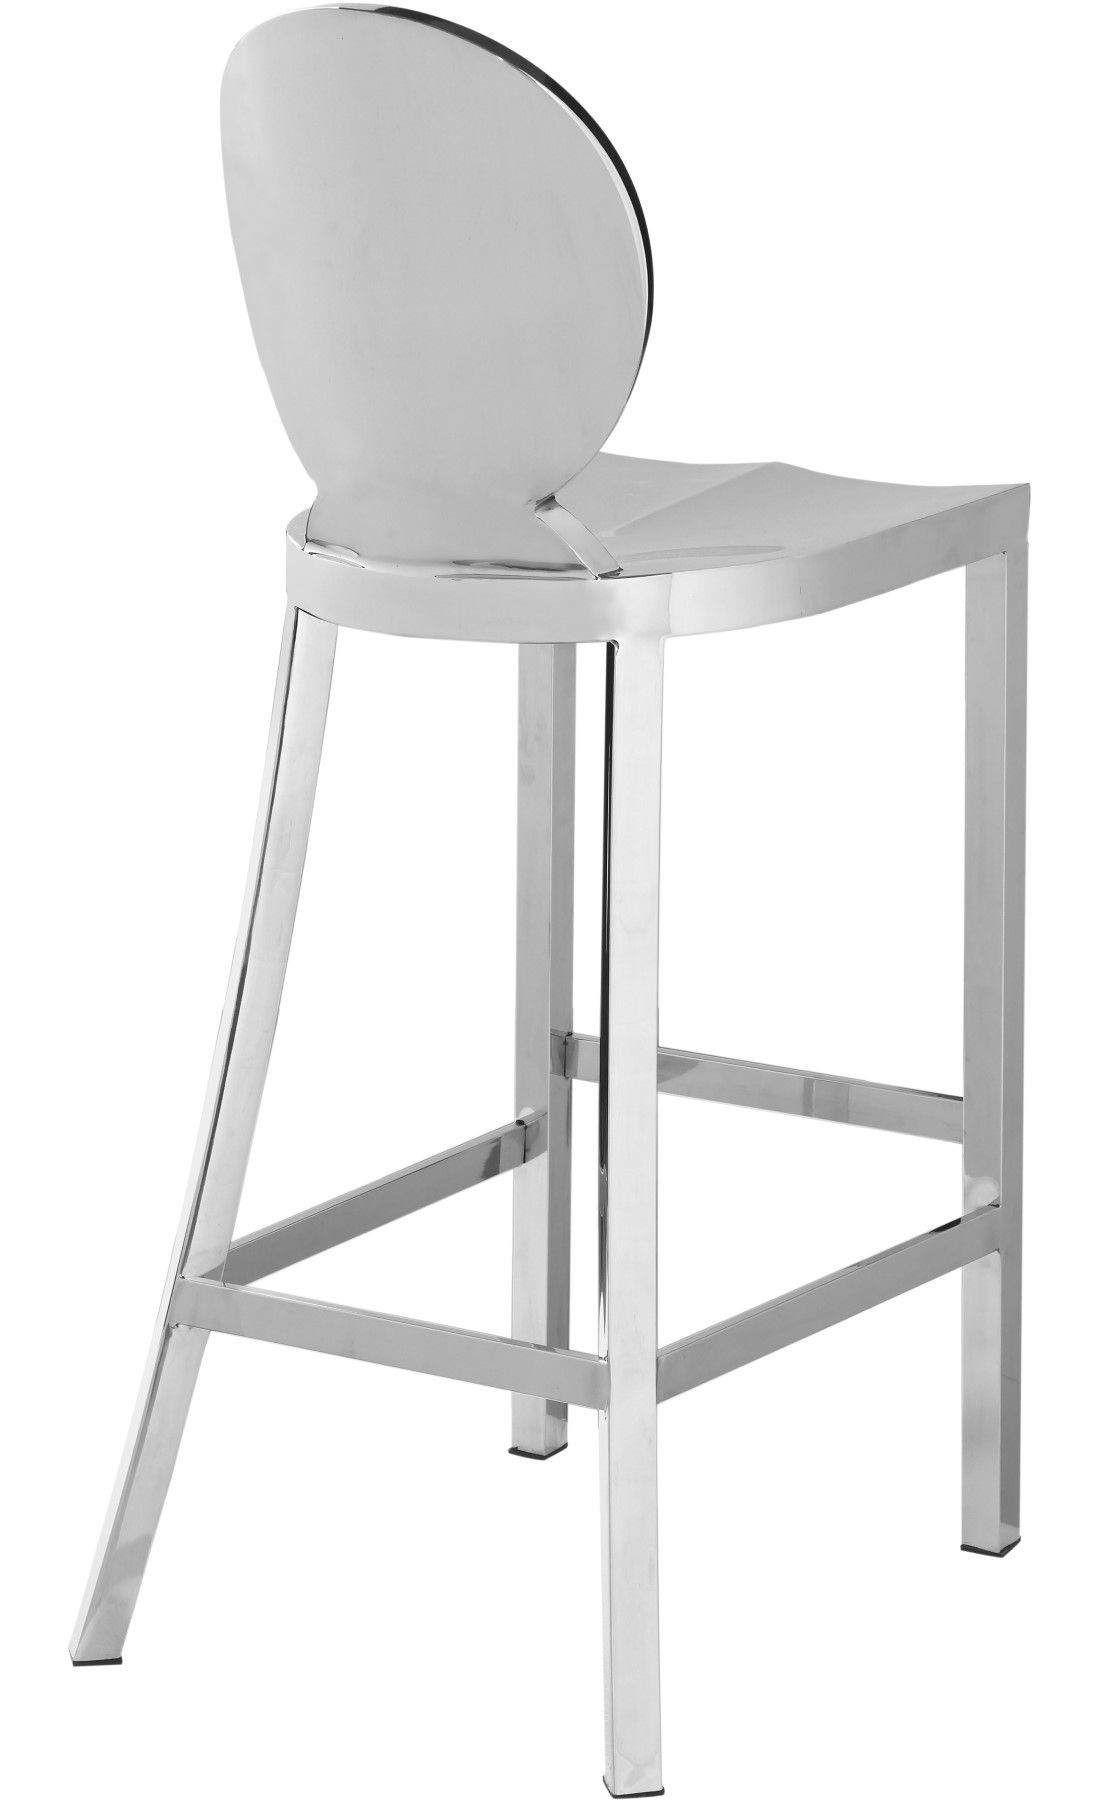 Zade contemporary chrome stainless steel bar stool with 1